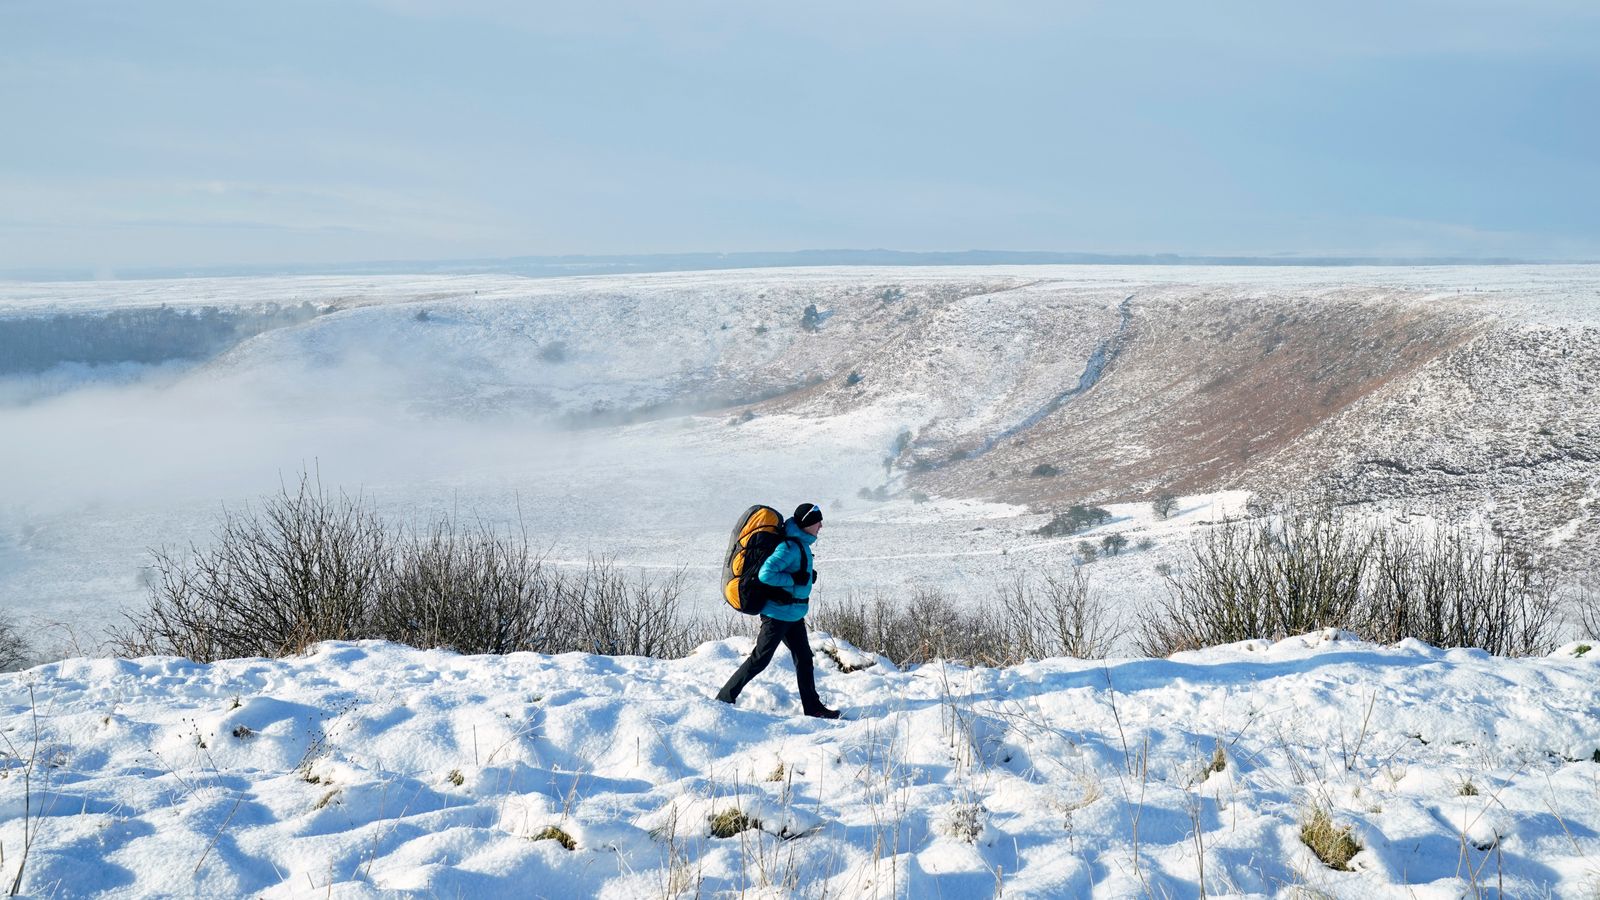 Weather in pictures: Snow blankets parts of UK